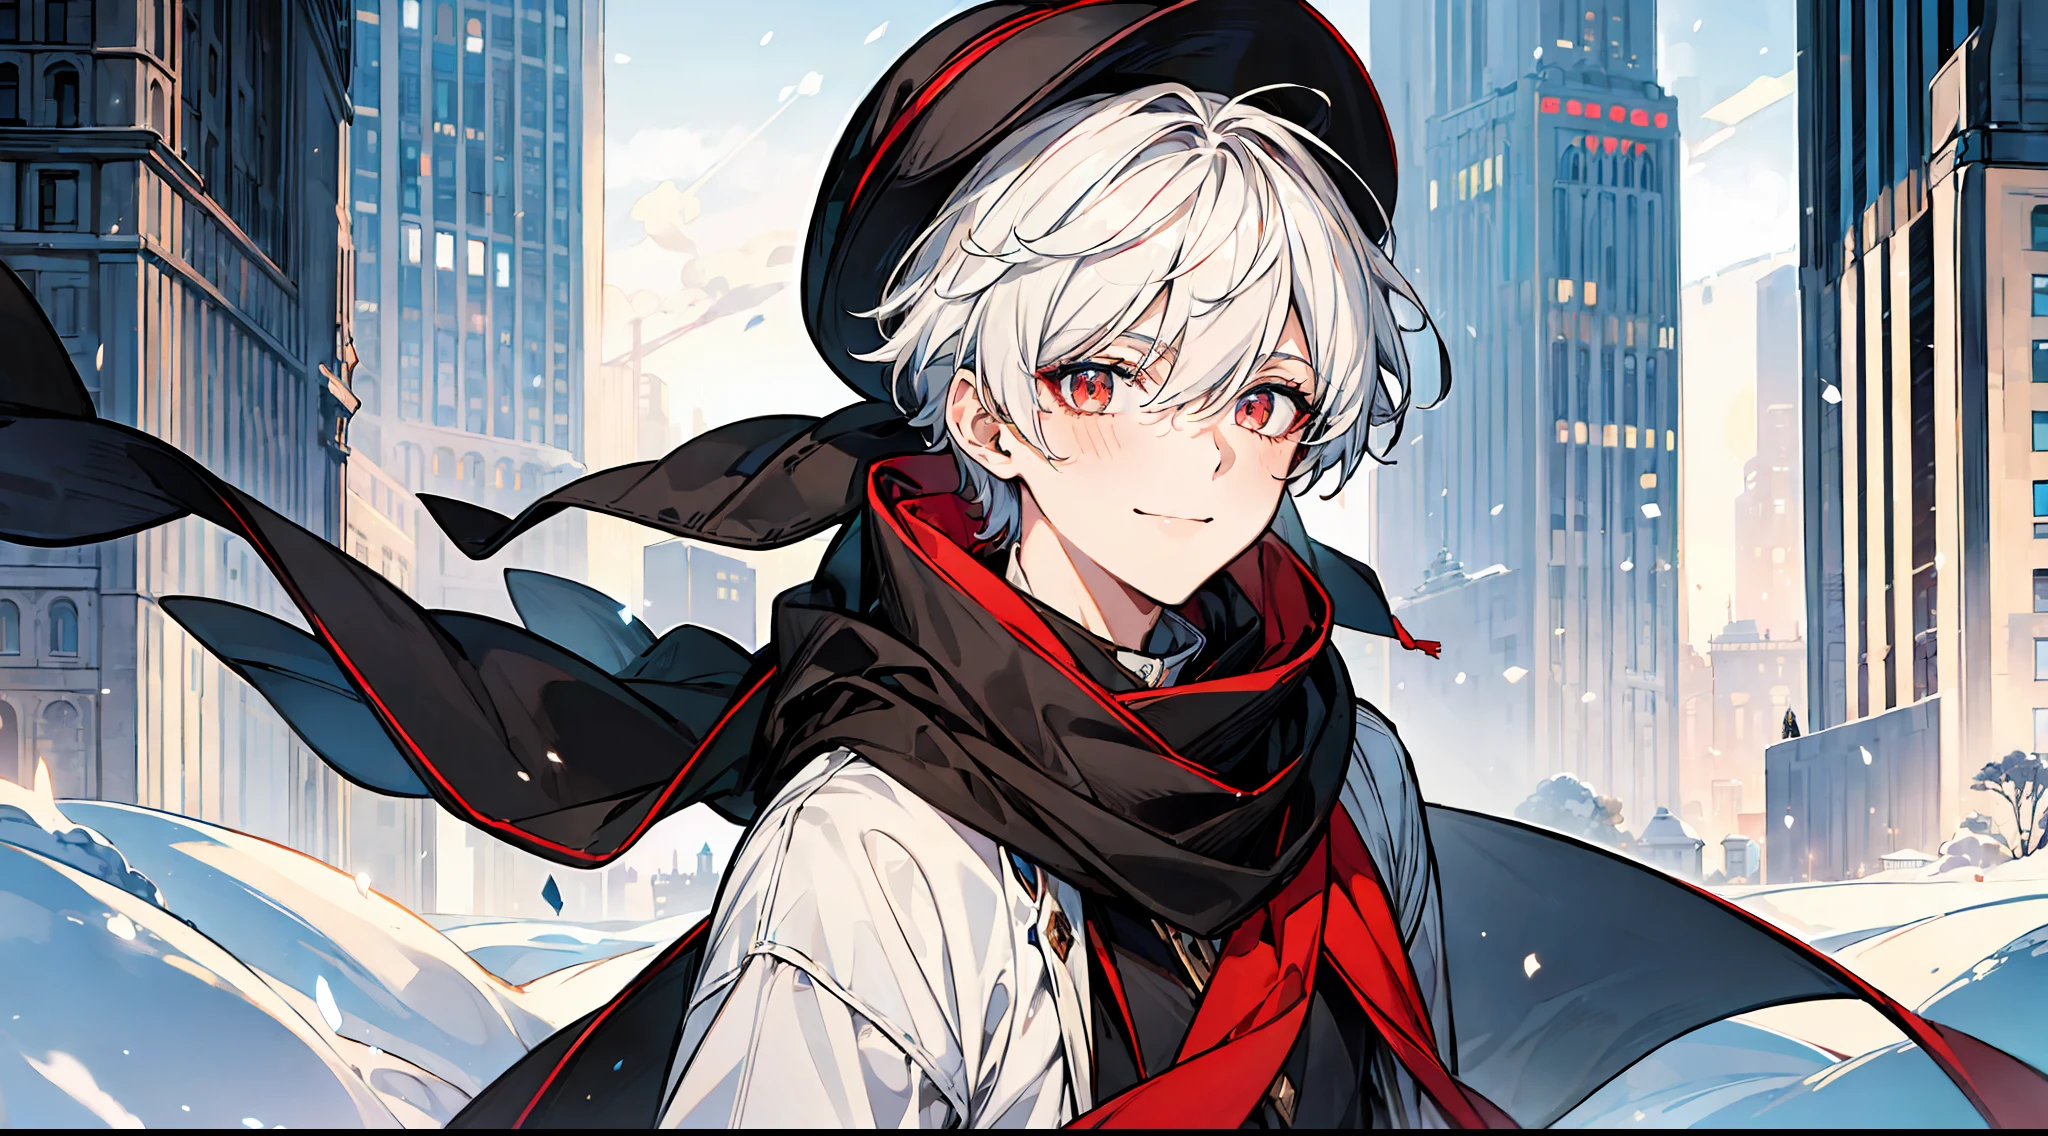 ((masterpiece)),(((best quality))), (high-quality, breathtaking),(expressive eyes, perfect face), a short young boy, short white hair, red eyes, smiling, black winter outfit, wear short shorts, hat, scarf, stocking, shine, glow, snow, city, close up, portrait